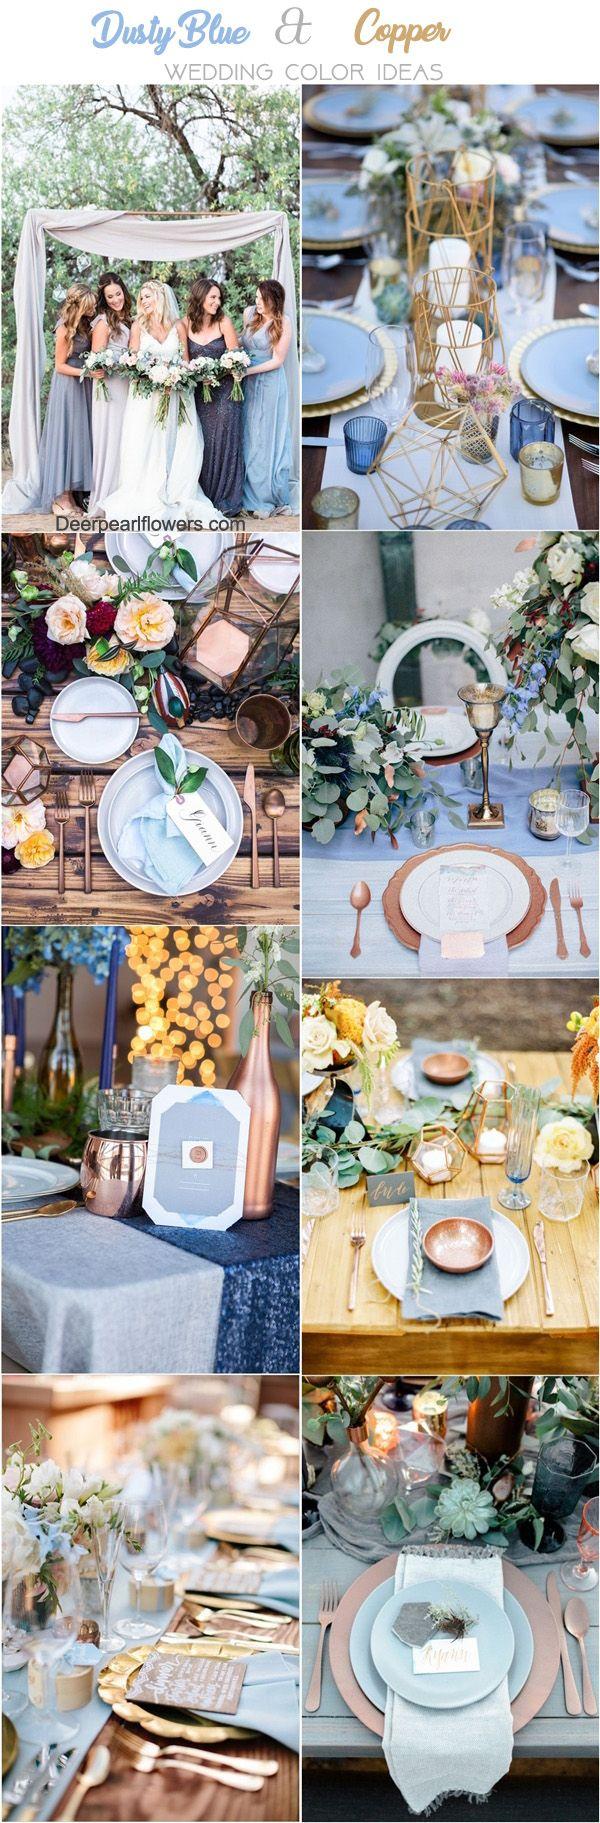 Hochzeit - Top 20 Dusty Blue And Copper Wedding Color Ideas